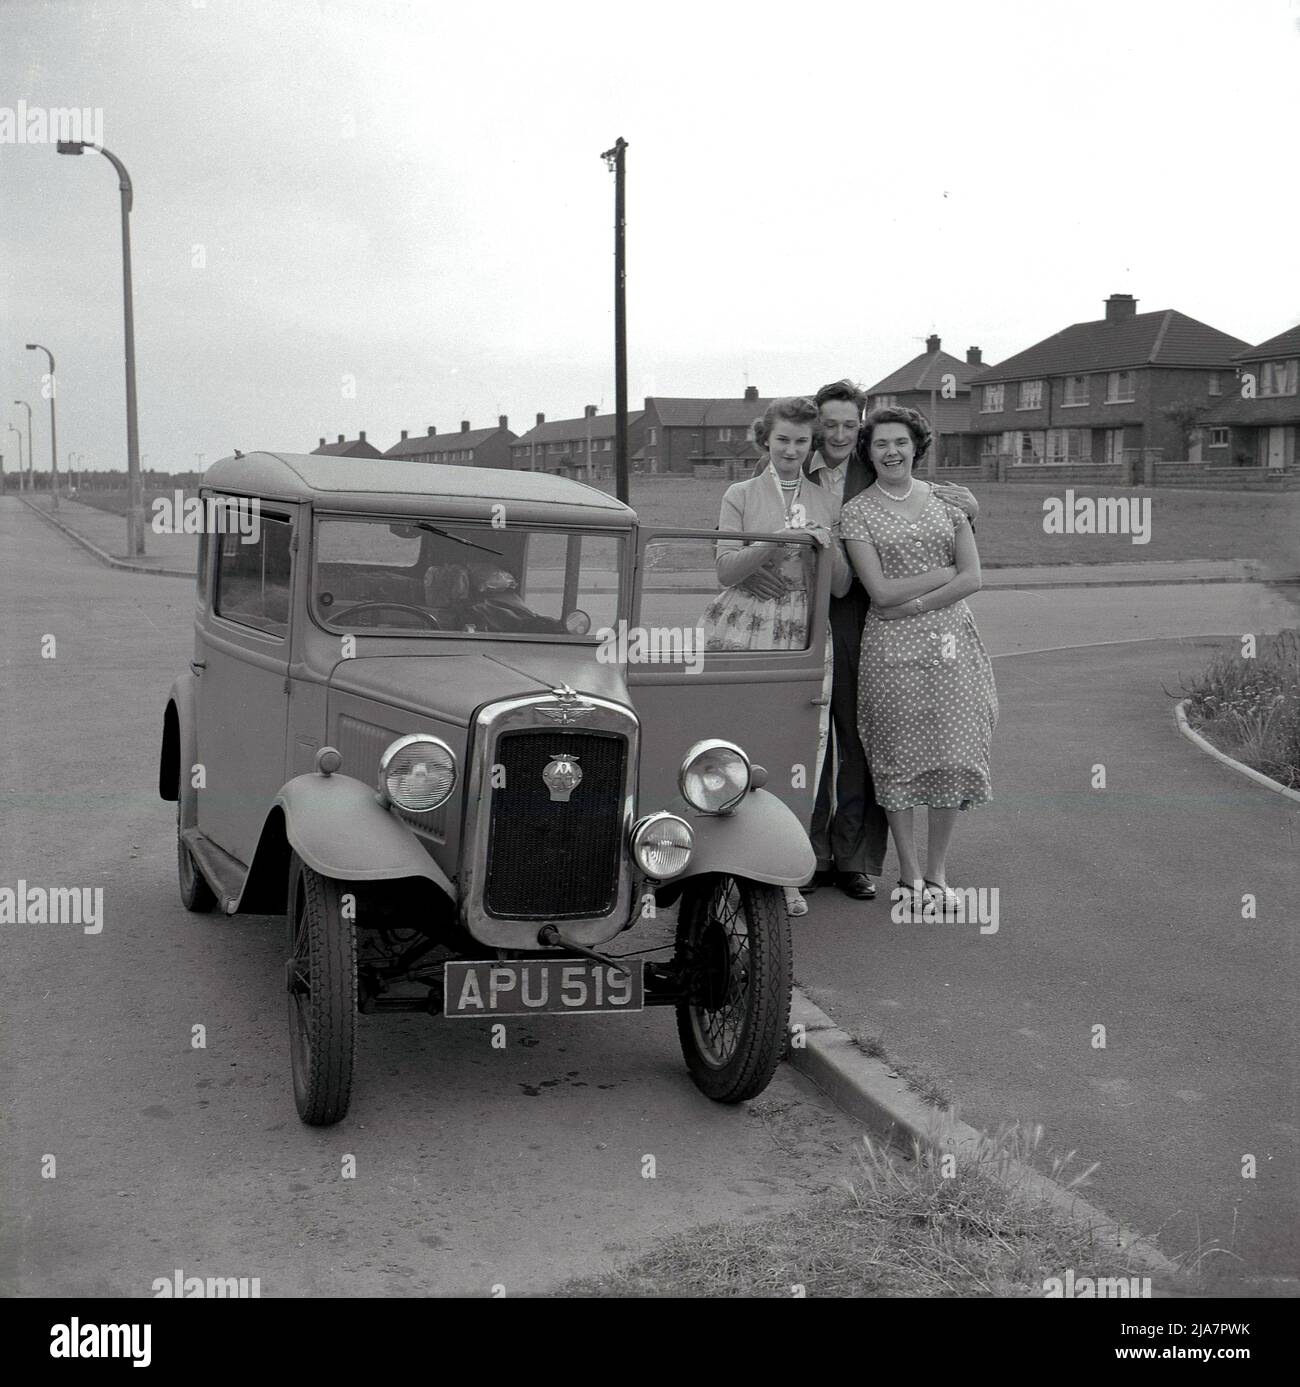 1950s, historical, post-war Britain and on a pavement at a housing estate, a young man, his girlfriend and mother stand together for a photo by their motor car, an Austin Seven. The British made Austin 7 was a small - nicknamed 'Baby Austin' - economy car produced from 1923 to 1939 bringing car ownership to those who could never before have afforded it, advertised as; 'A Penny-a-mile with four up covers the running costs'. It was also advertised women as 'The Car for the Feminine Touch'. The motorcar was still in use in Britain way into the 1960s. Stock Photo